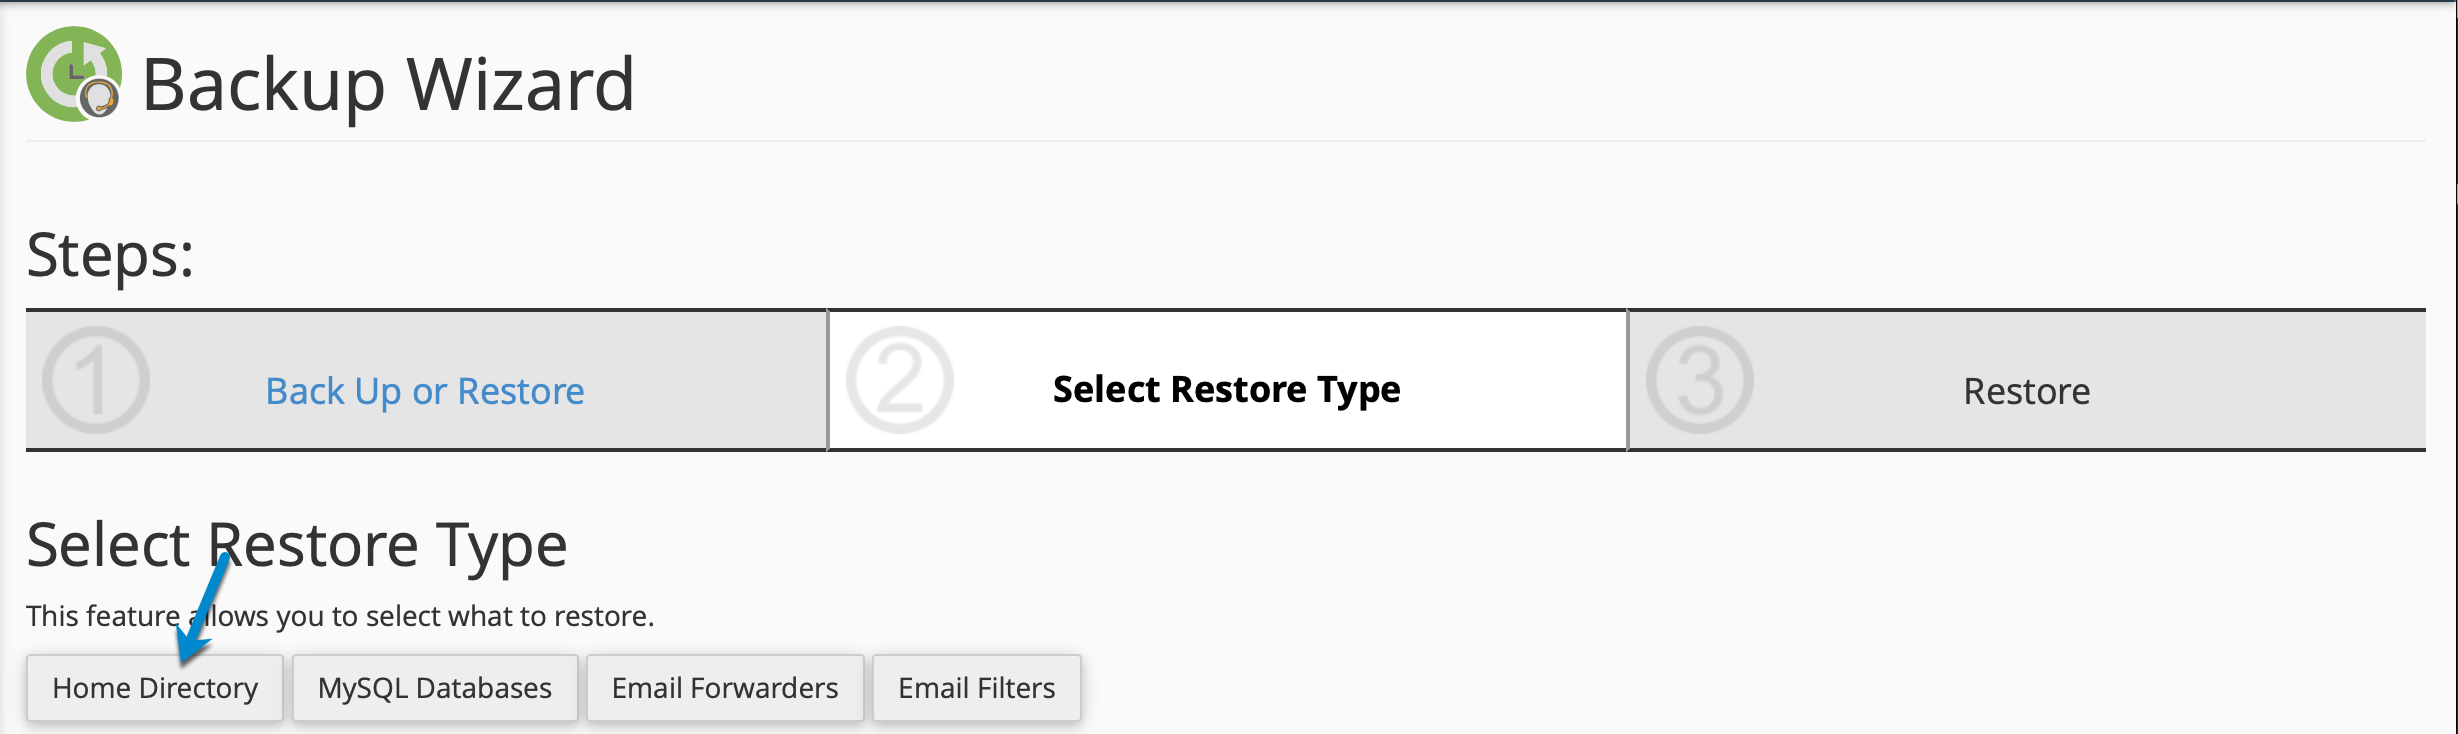 screenshot to select the home directory cPanel account restoration option